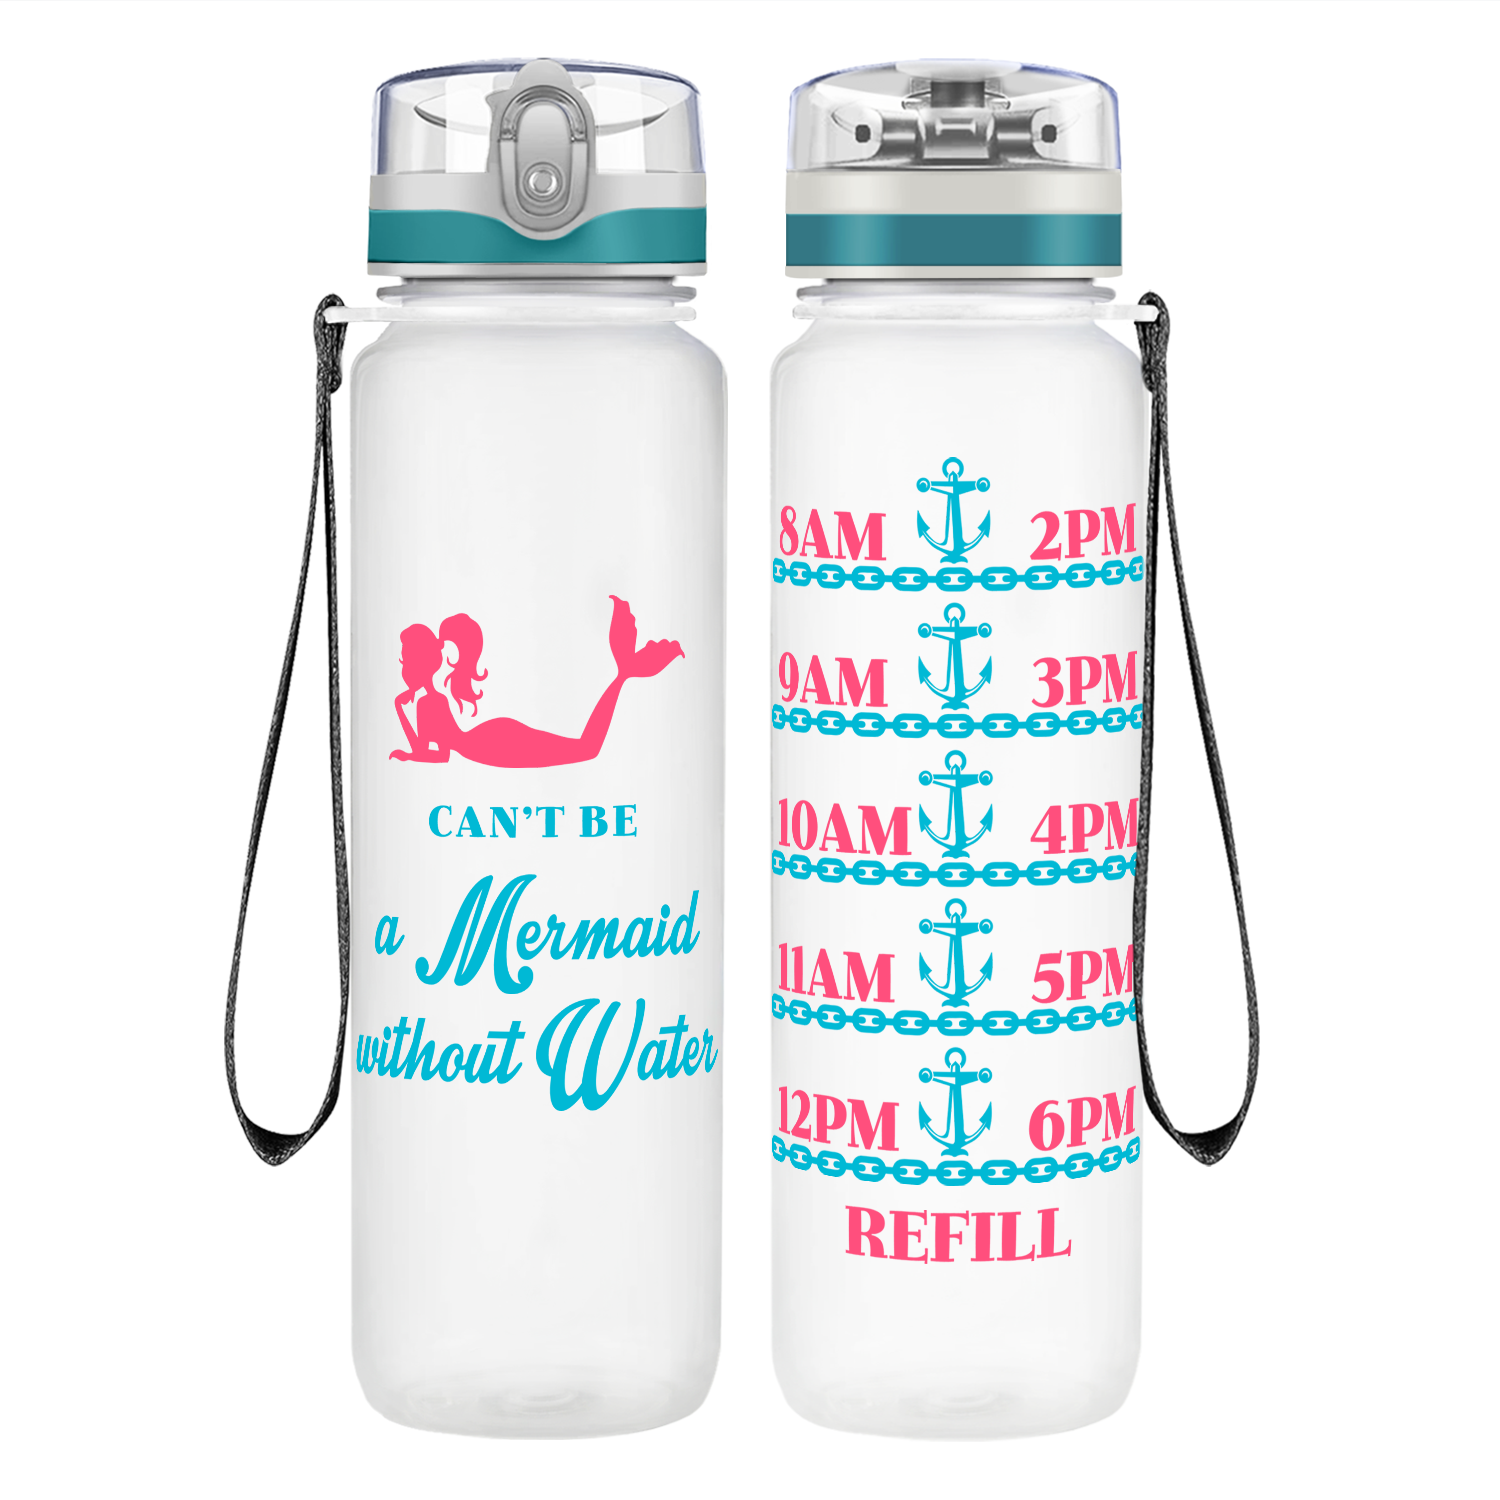 No Water, No Mermaid on 32 oz Motivational Tracking Water Bottle